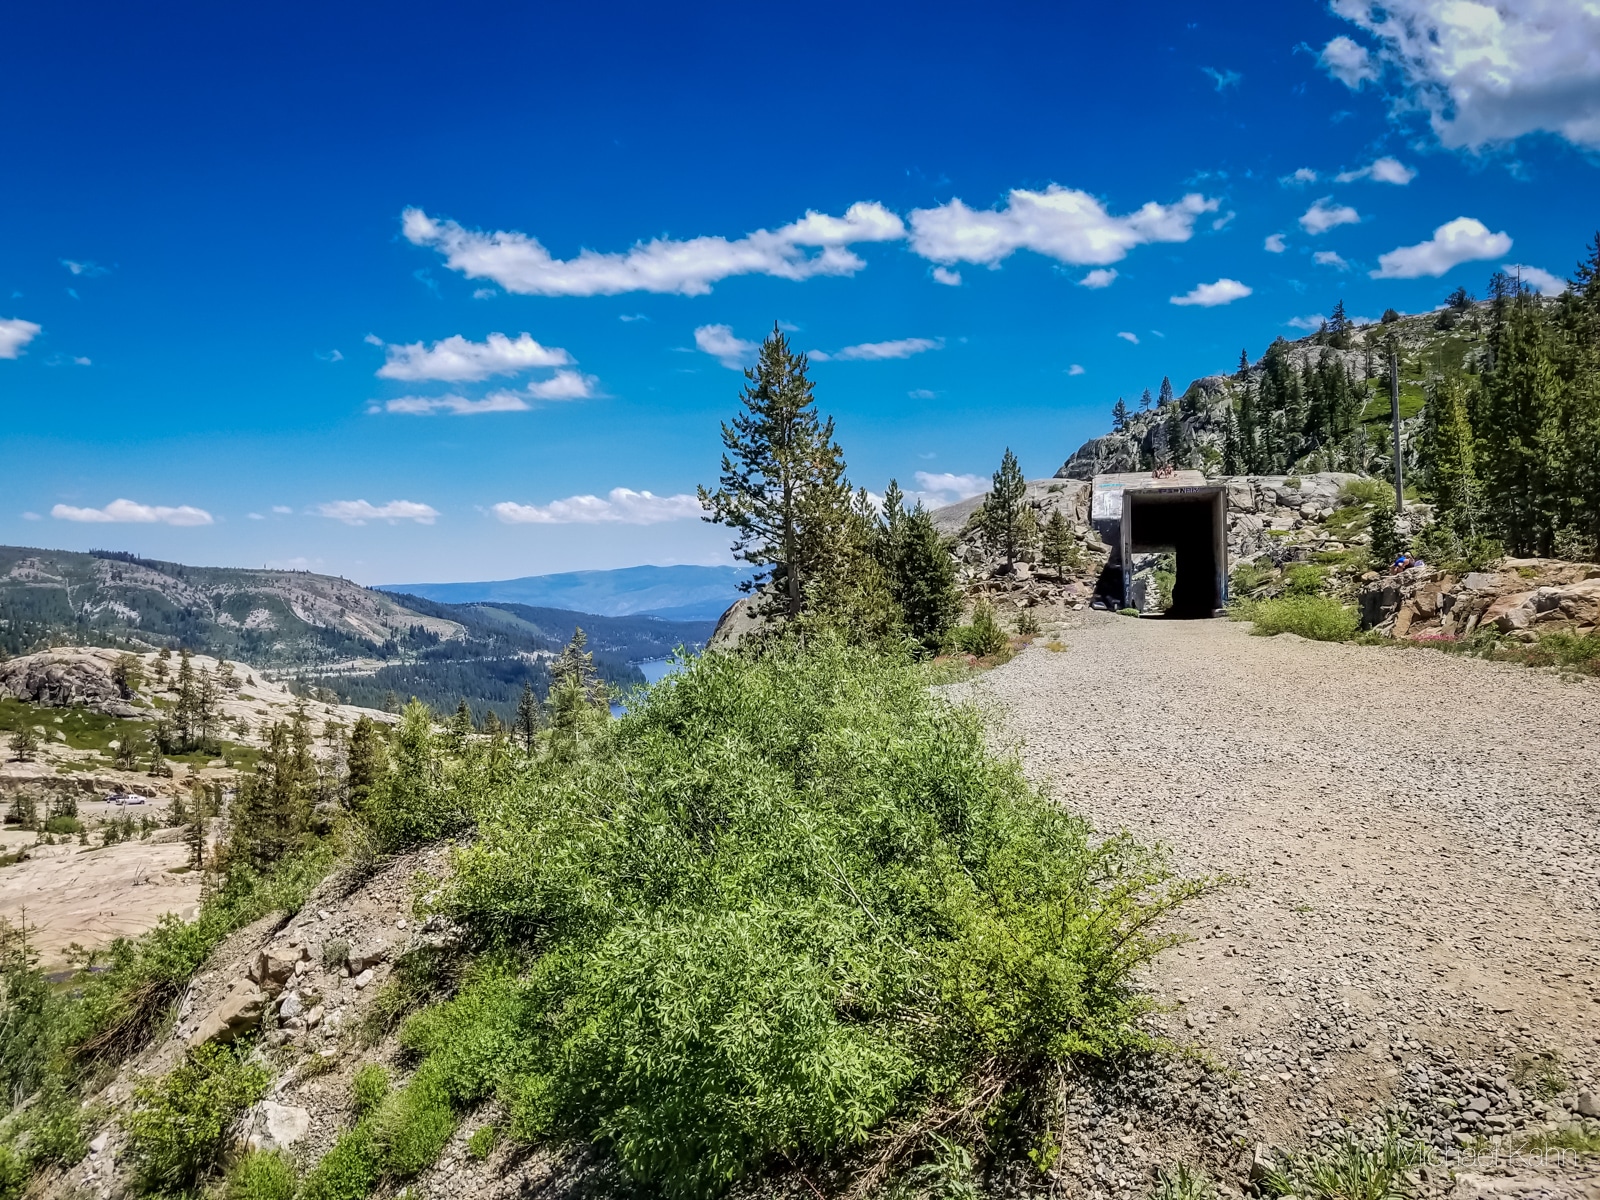 Donner pass summit tunnel hike, view of lake